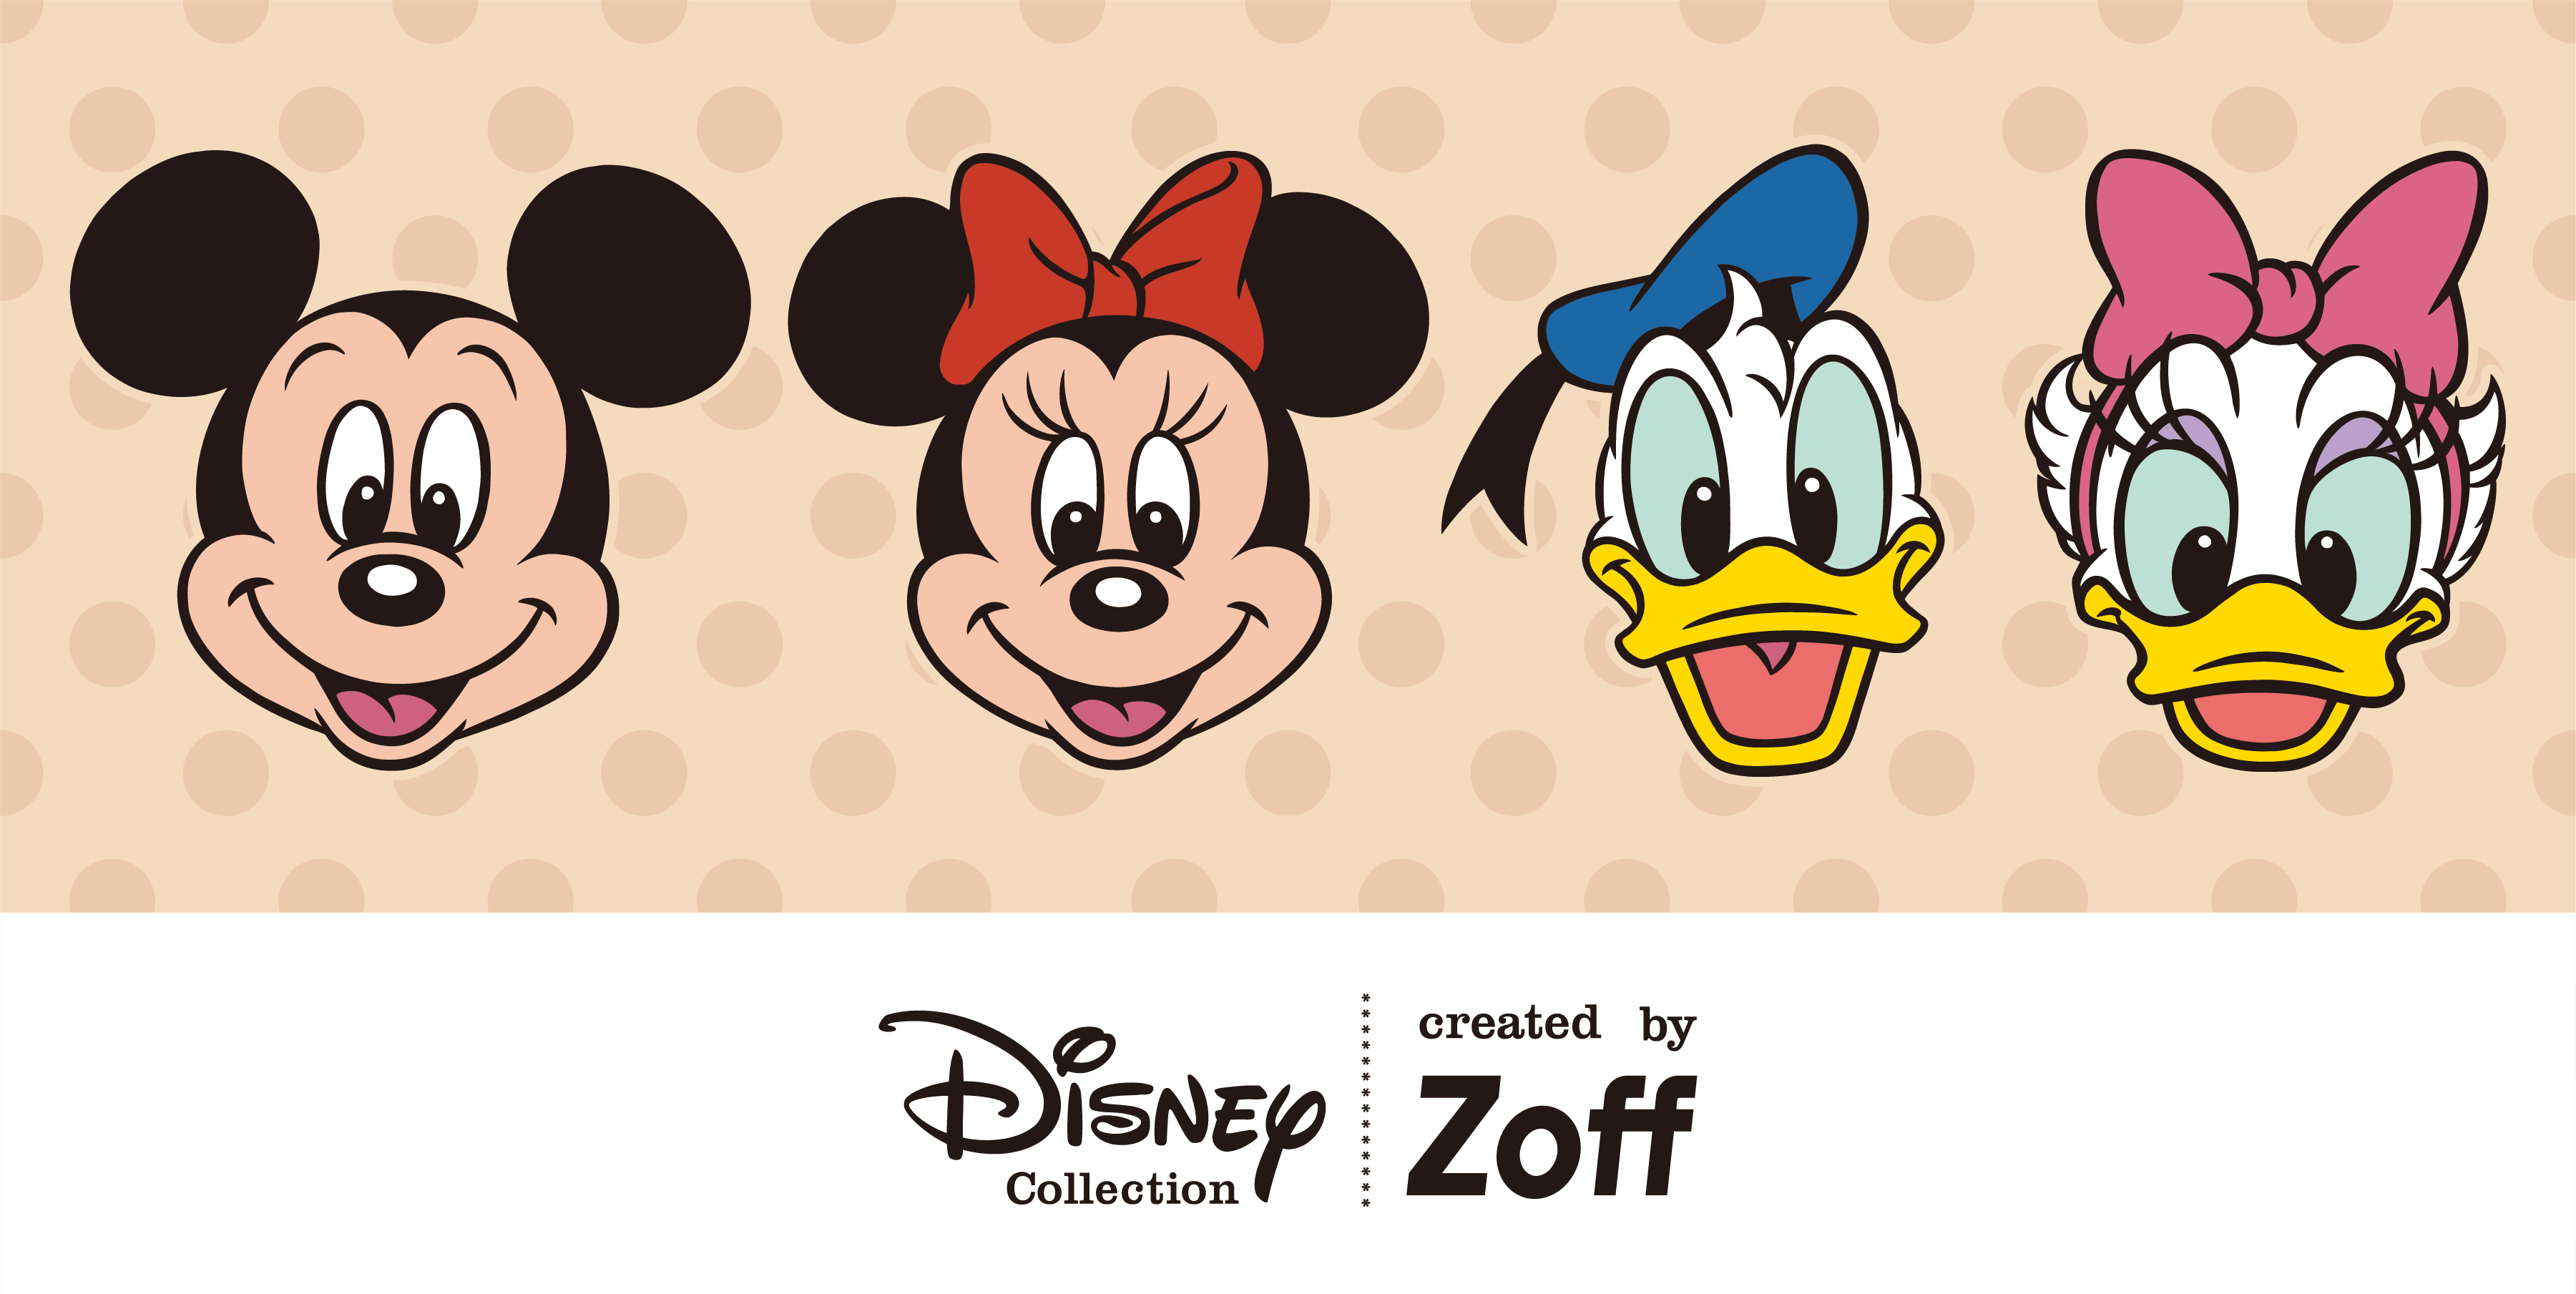 Disney Collection created by Zoff